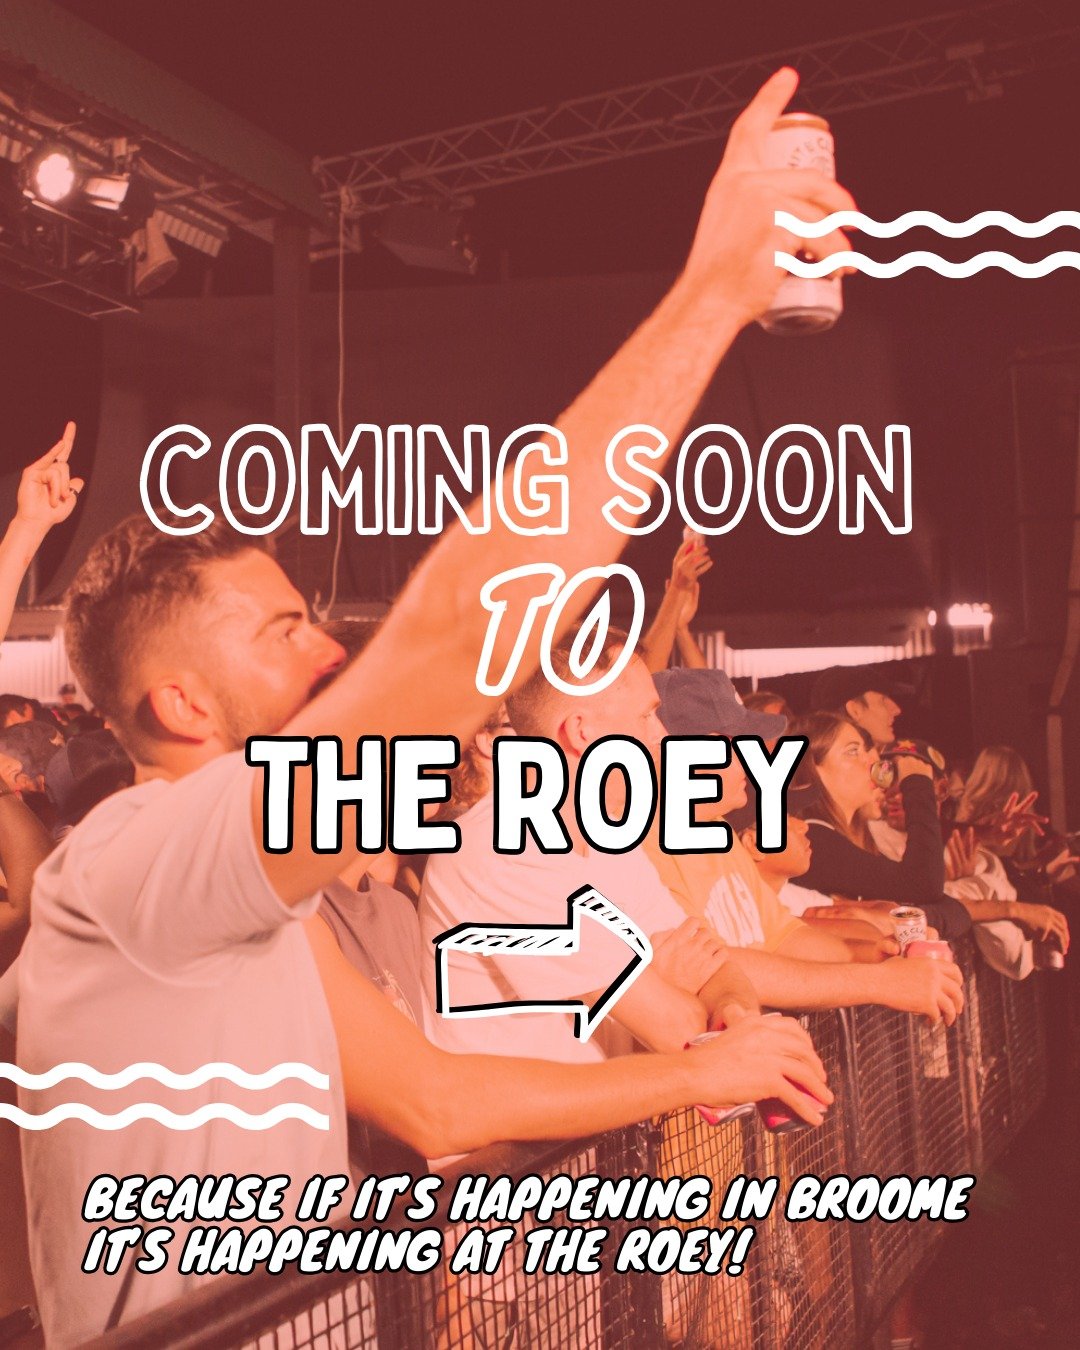 LOOK 👀 who's coming to The Roey this season....

Sat 11th May - BJORN AGAIN, Waterloo Anniversary Tour

Fri 31st May - END OF FASHION

Wed 26th June - SIX60, The Grassroots Tour

Sat 29th June - TROY CASSAR DALEY

Sat 6th July - LEGS ELECTRIC
Ticket